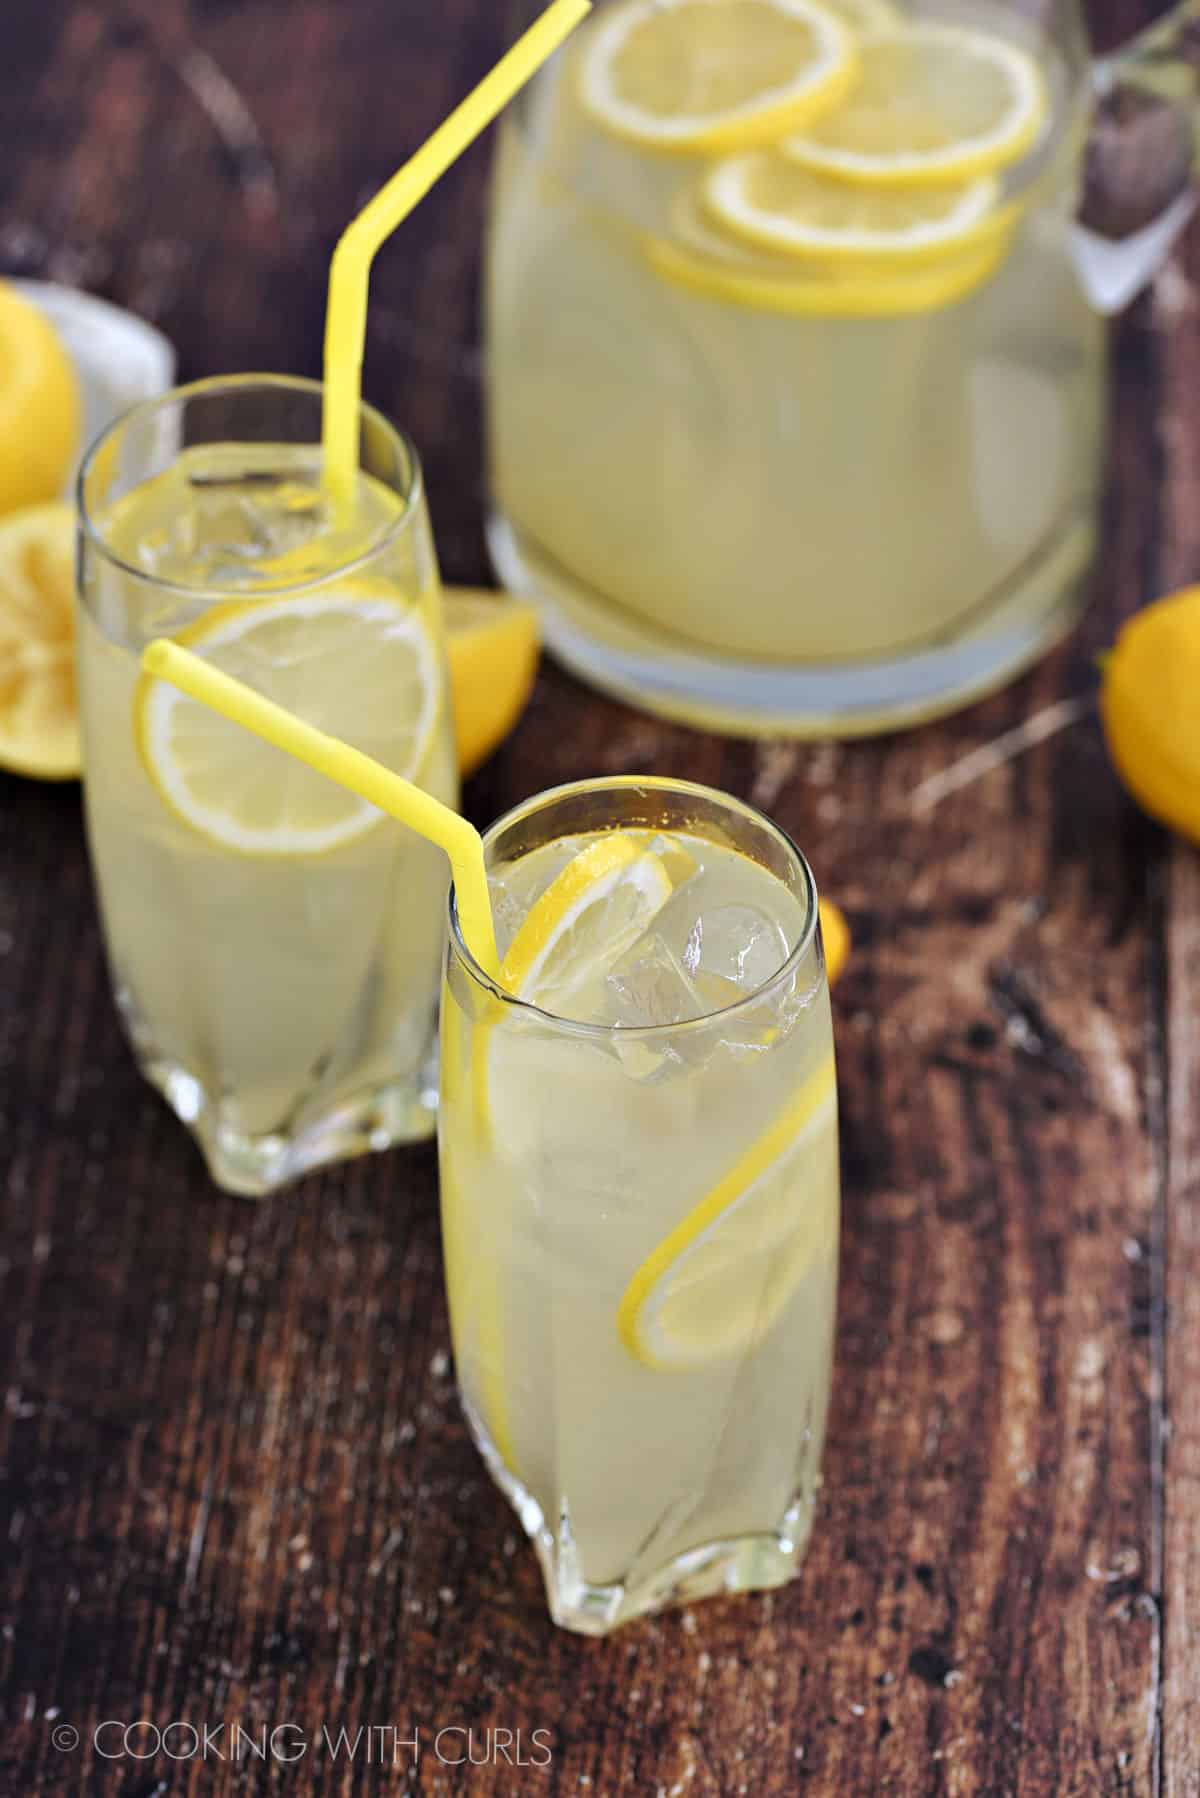 Two, tall glasses and a glass pitcher filled with ice, lemonade, and lemon slices with yellow straws.